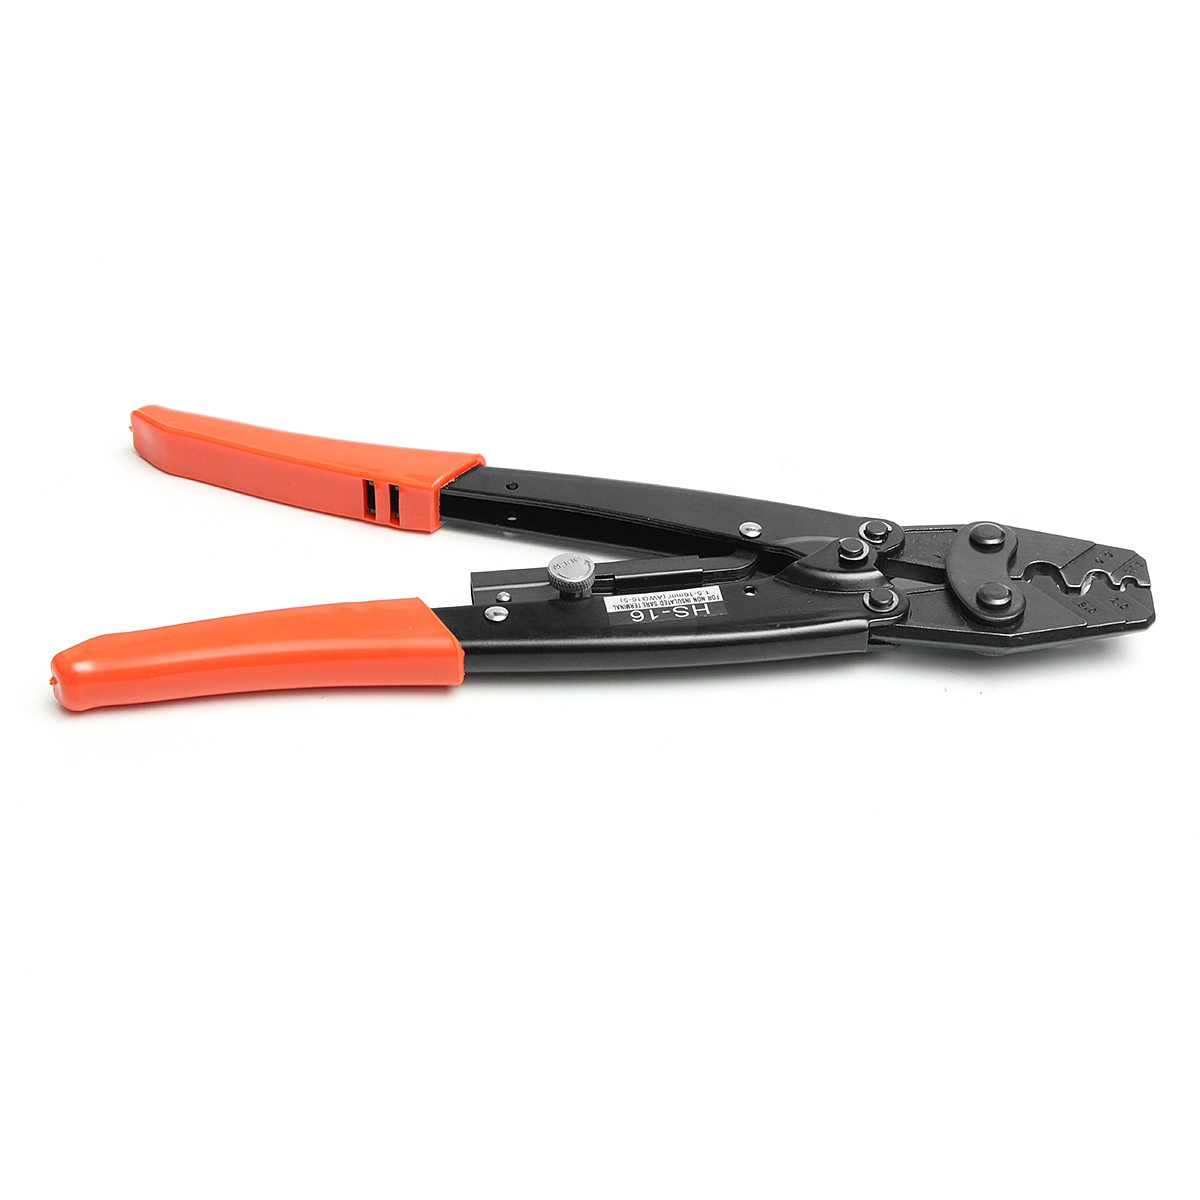 50-Amp-125-16-mm2-Plug-Cable-Crimping-Tool-For-Wire-Crimper-Terminals-Links-1131124-6